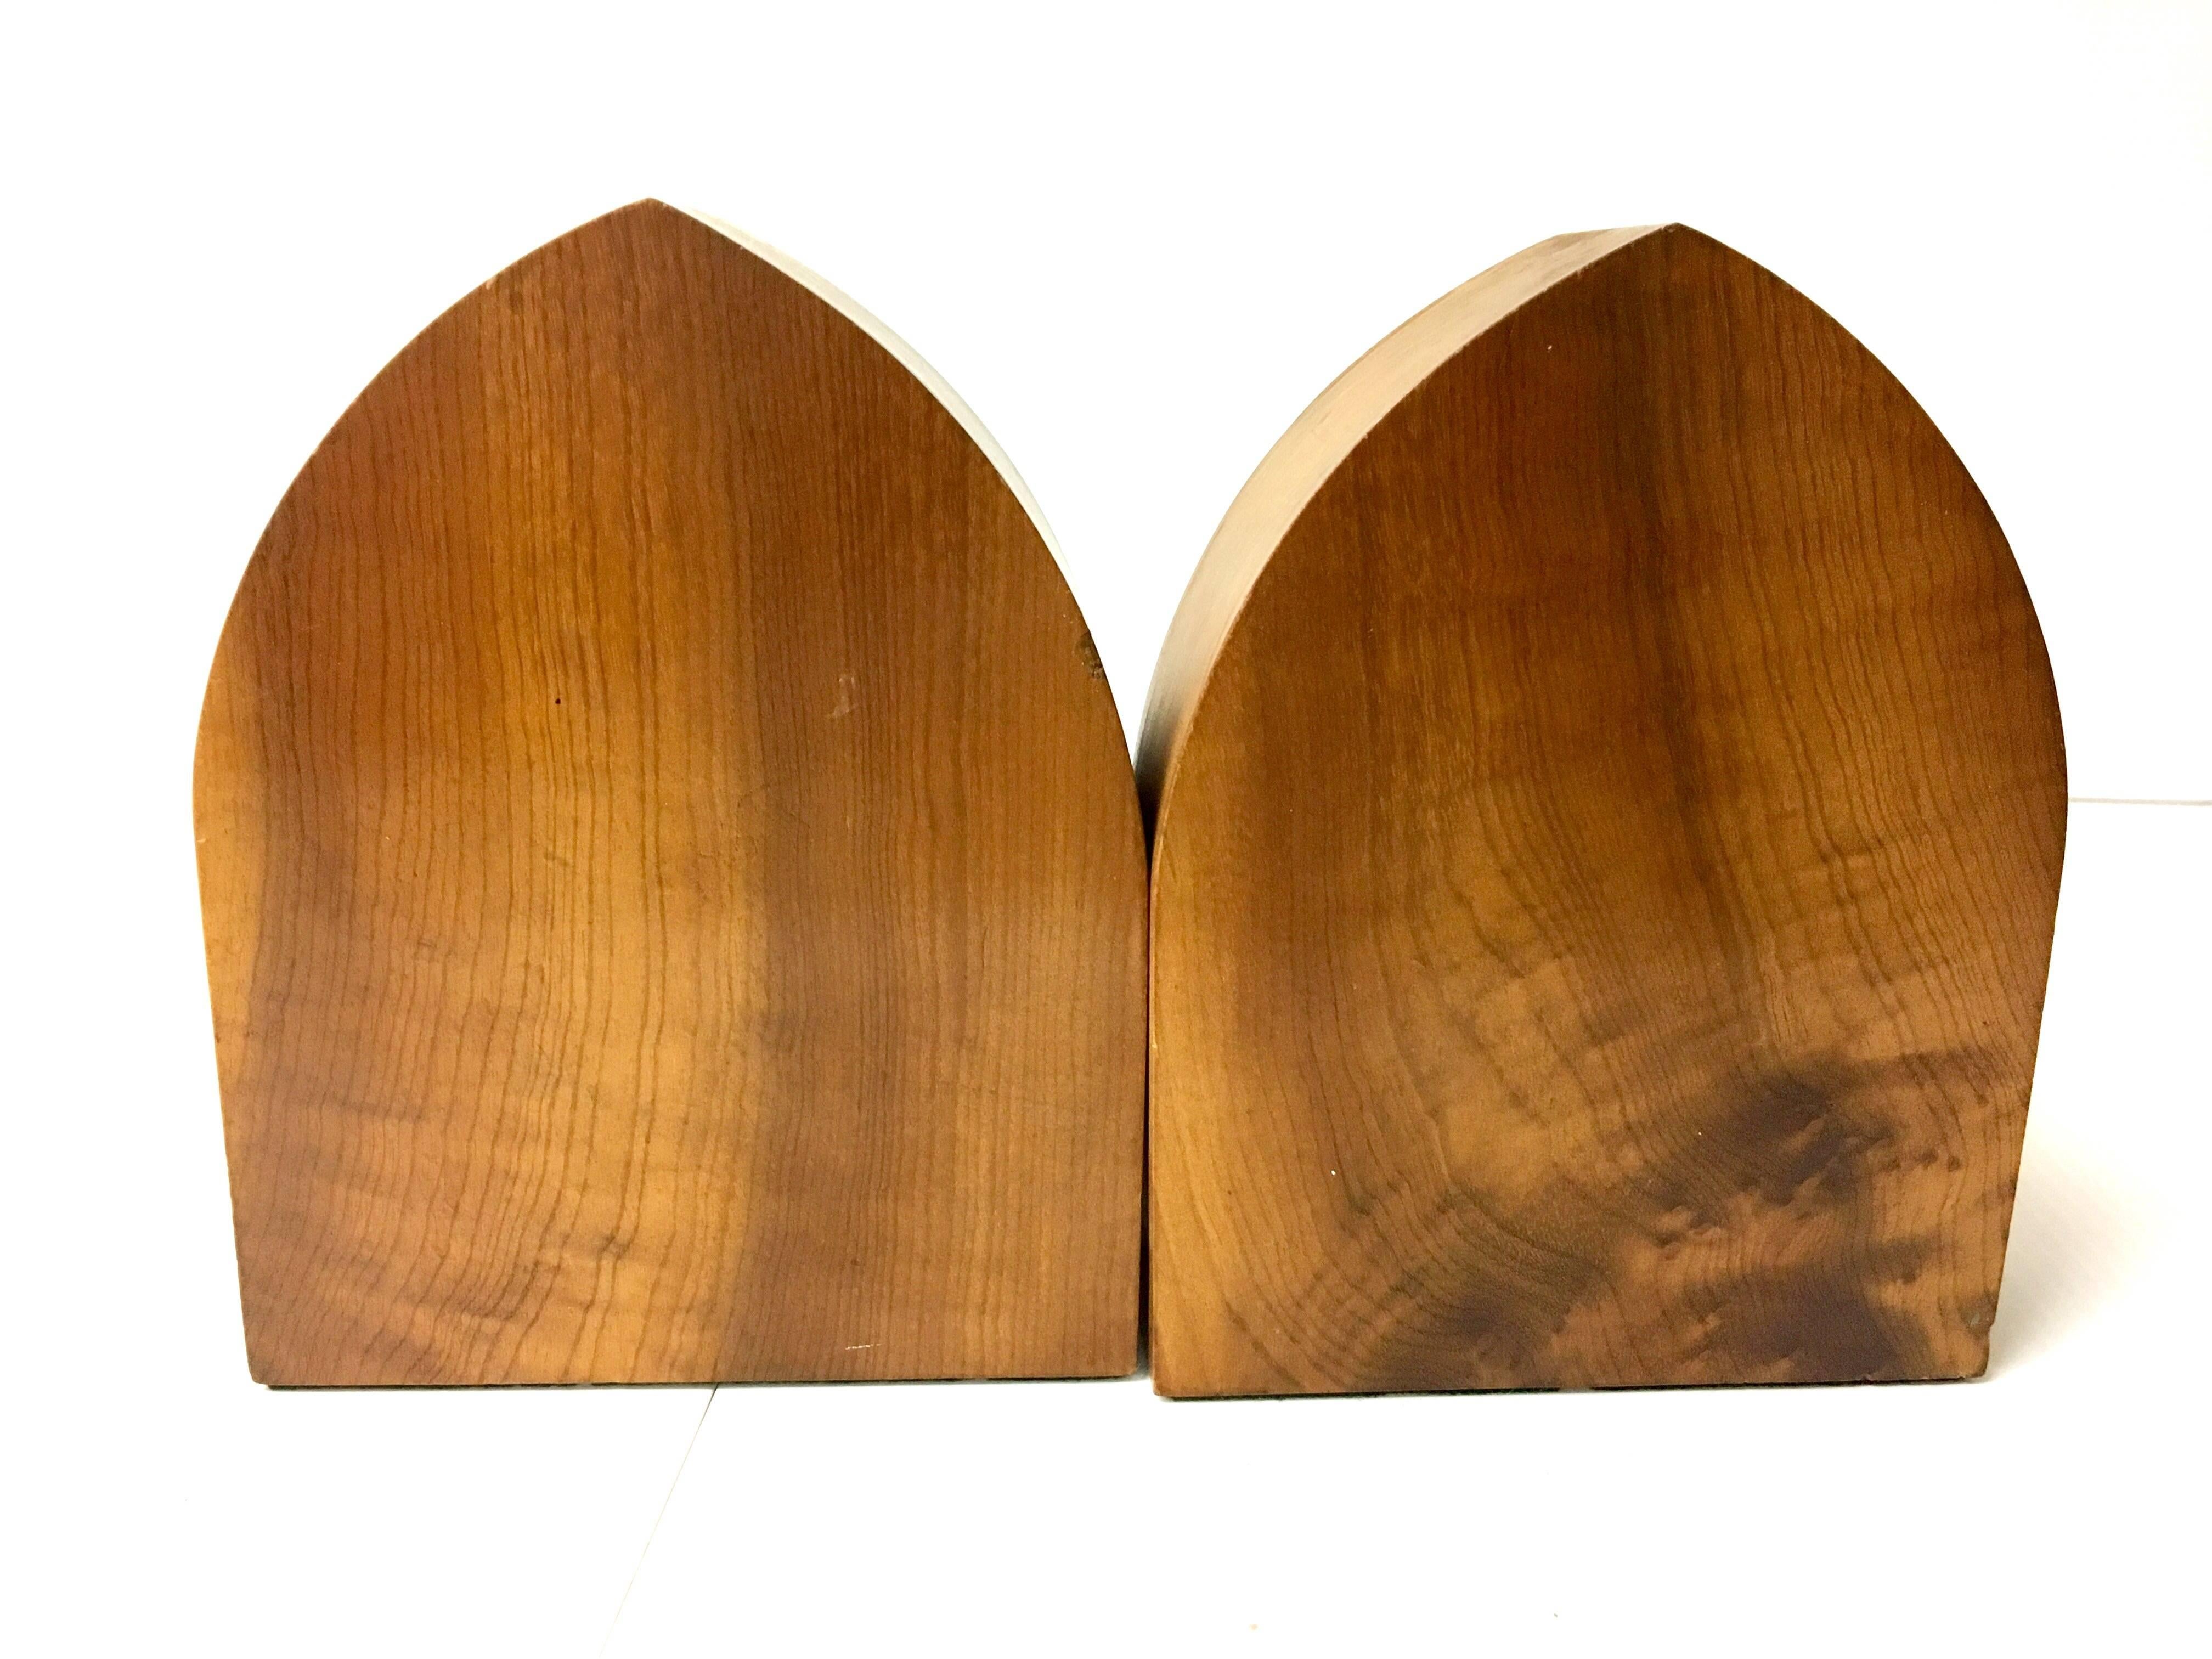 American Pair of Solid Maple Wood Art Deco Bookends For Sale